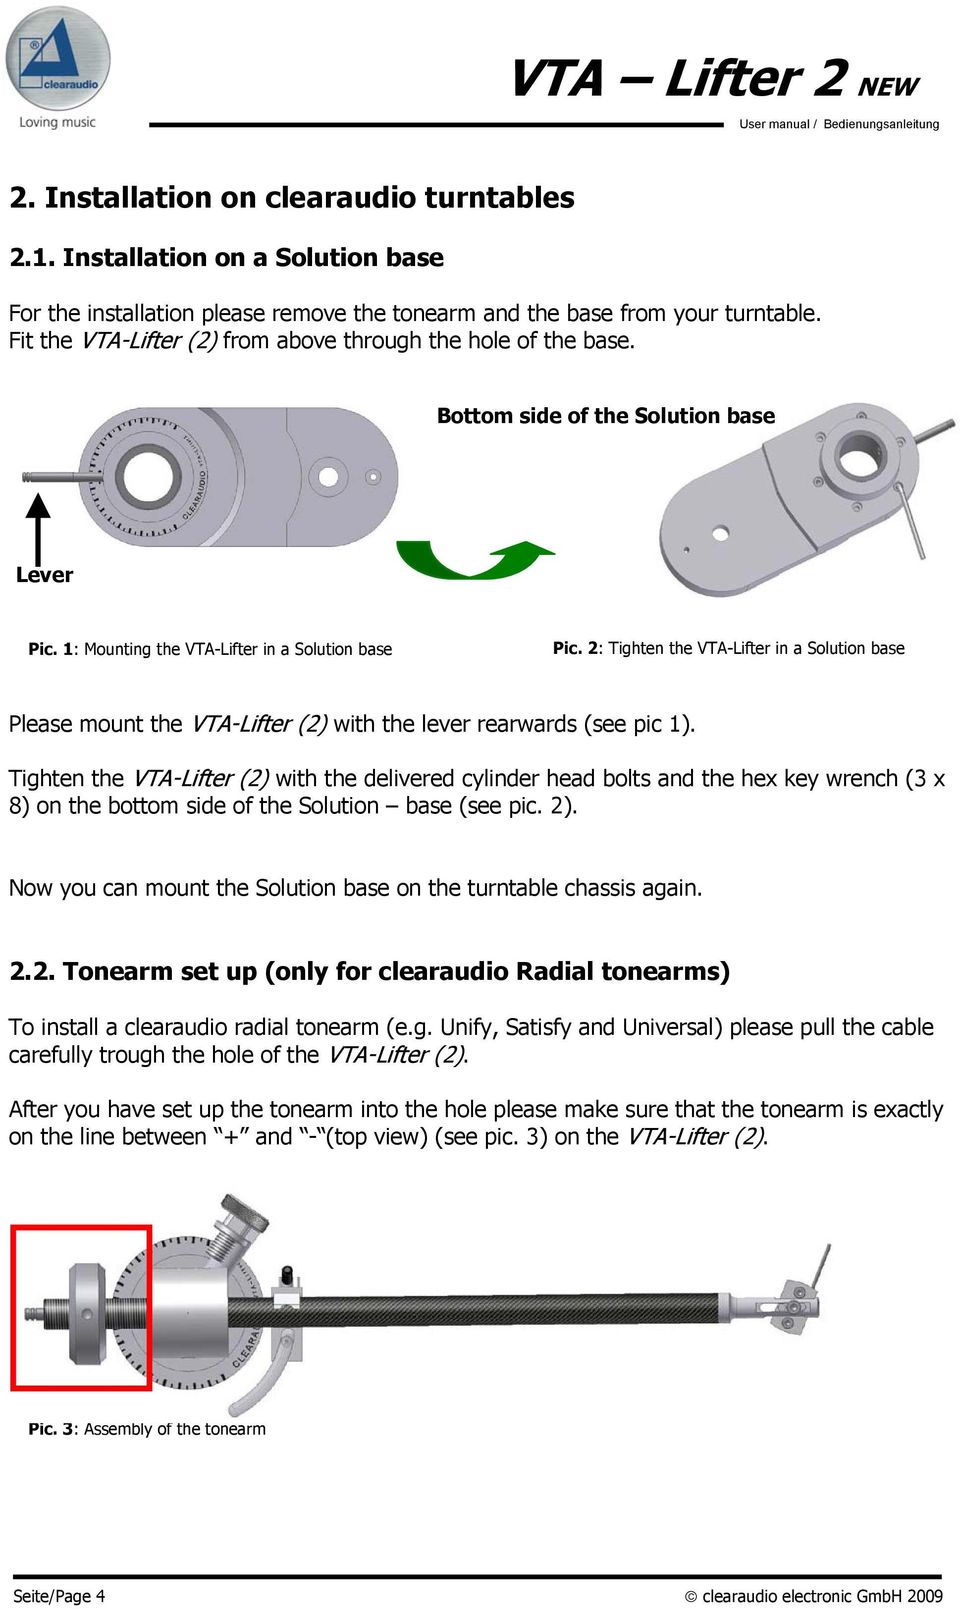 2: Tighten the VTA-Lifter in a Solution base Please mount the VTA-Lifter (2) with the lever rearwards (see pic 1).